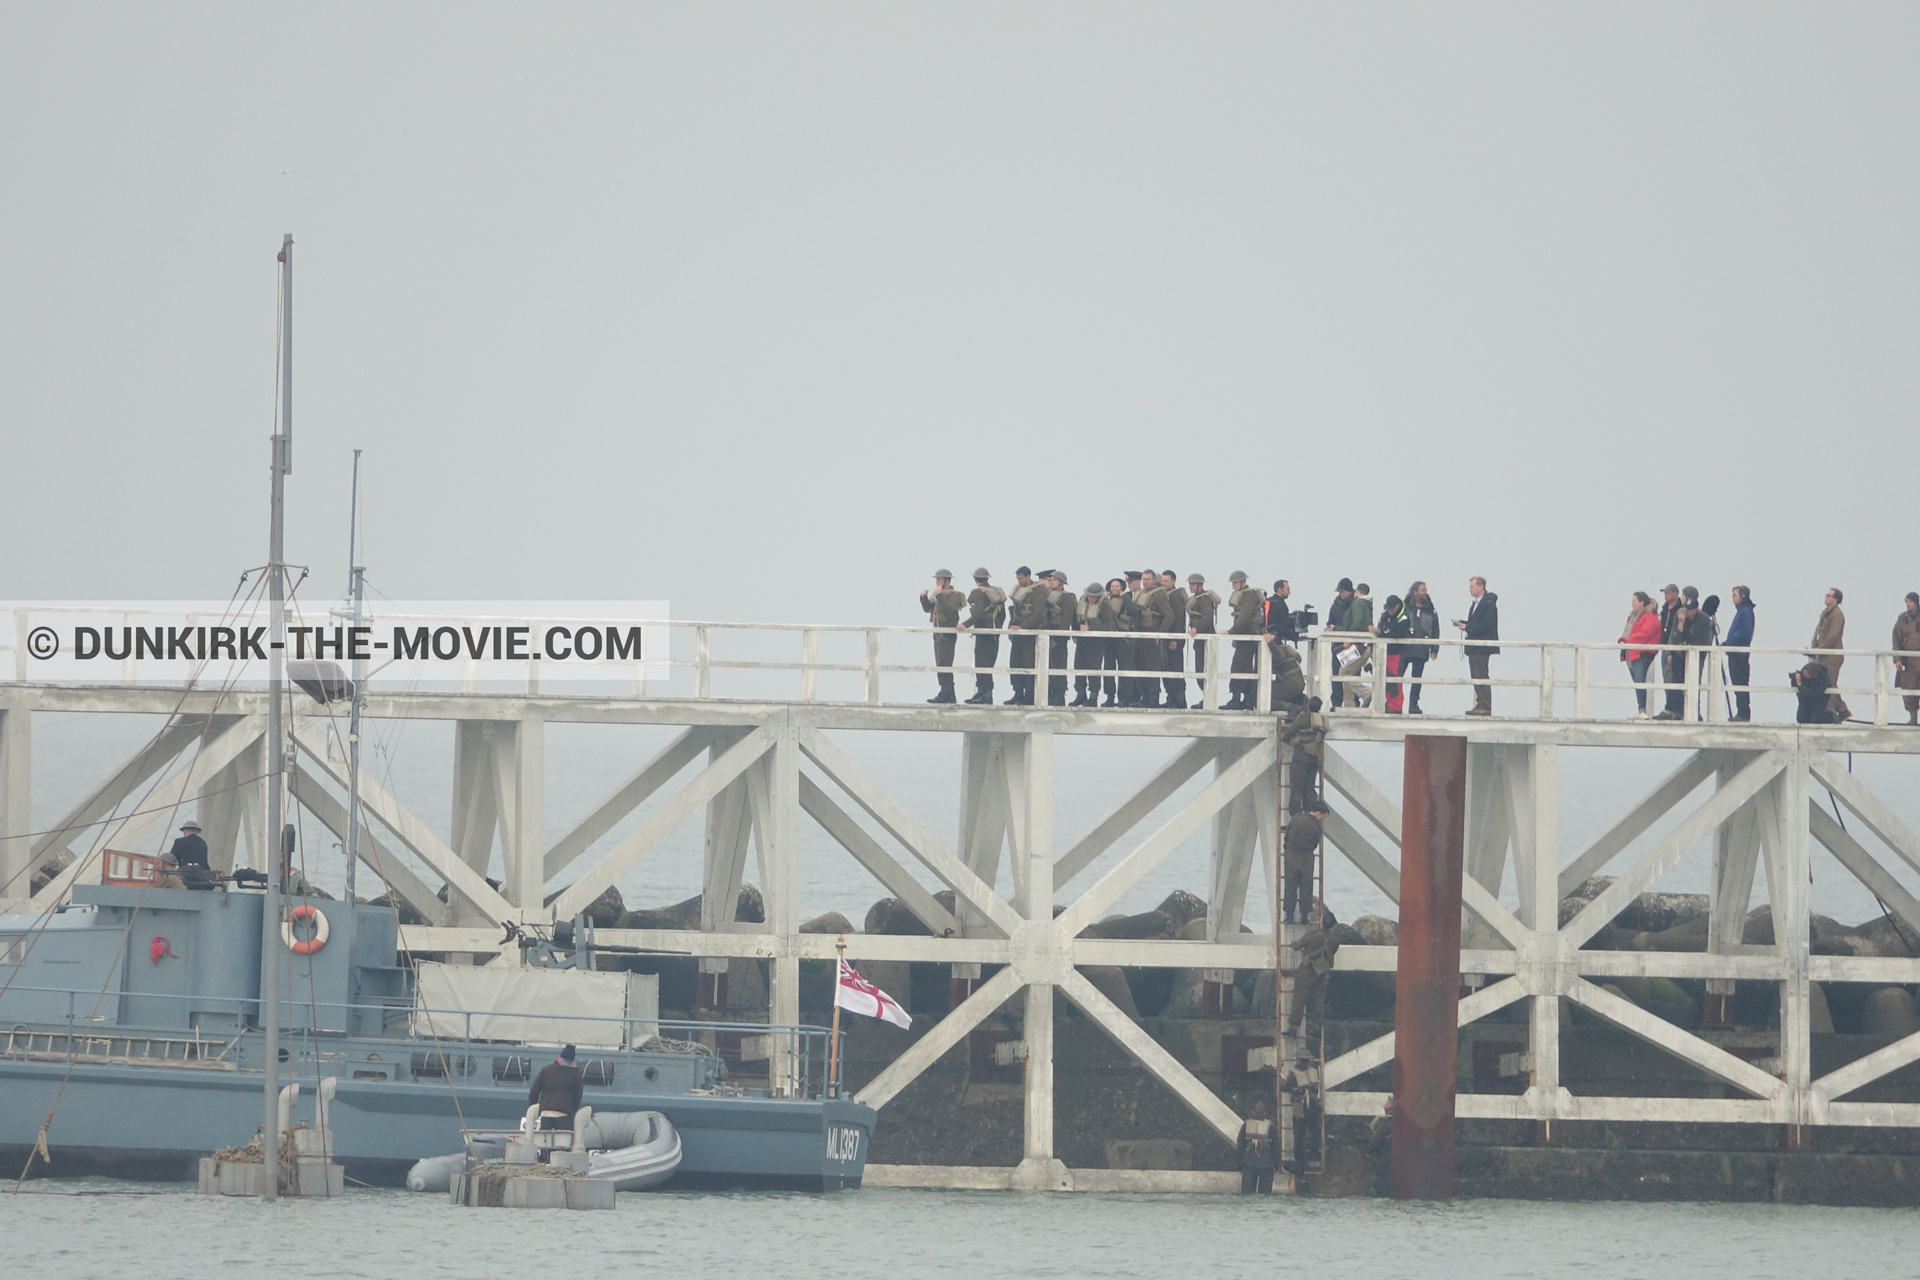 Picture with actor, grey sky, decor, supernumeraries, HMS Medusa - ML1387, Hoyte van Hoytema, EST pier, Christopher Nolan,  from behind the scene of the Dunkirk movie by Nolan